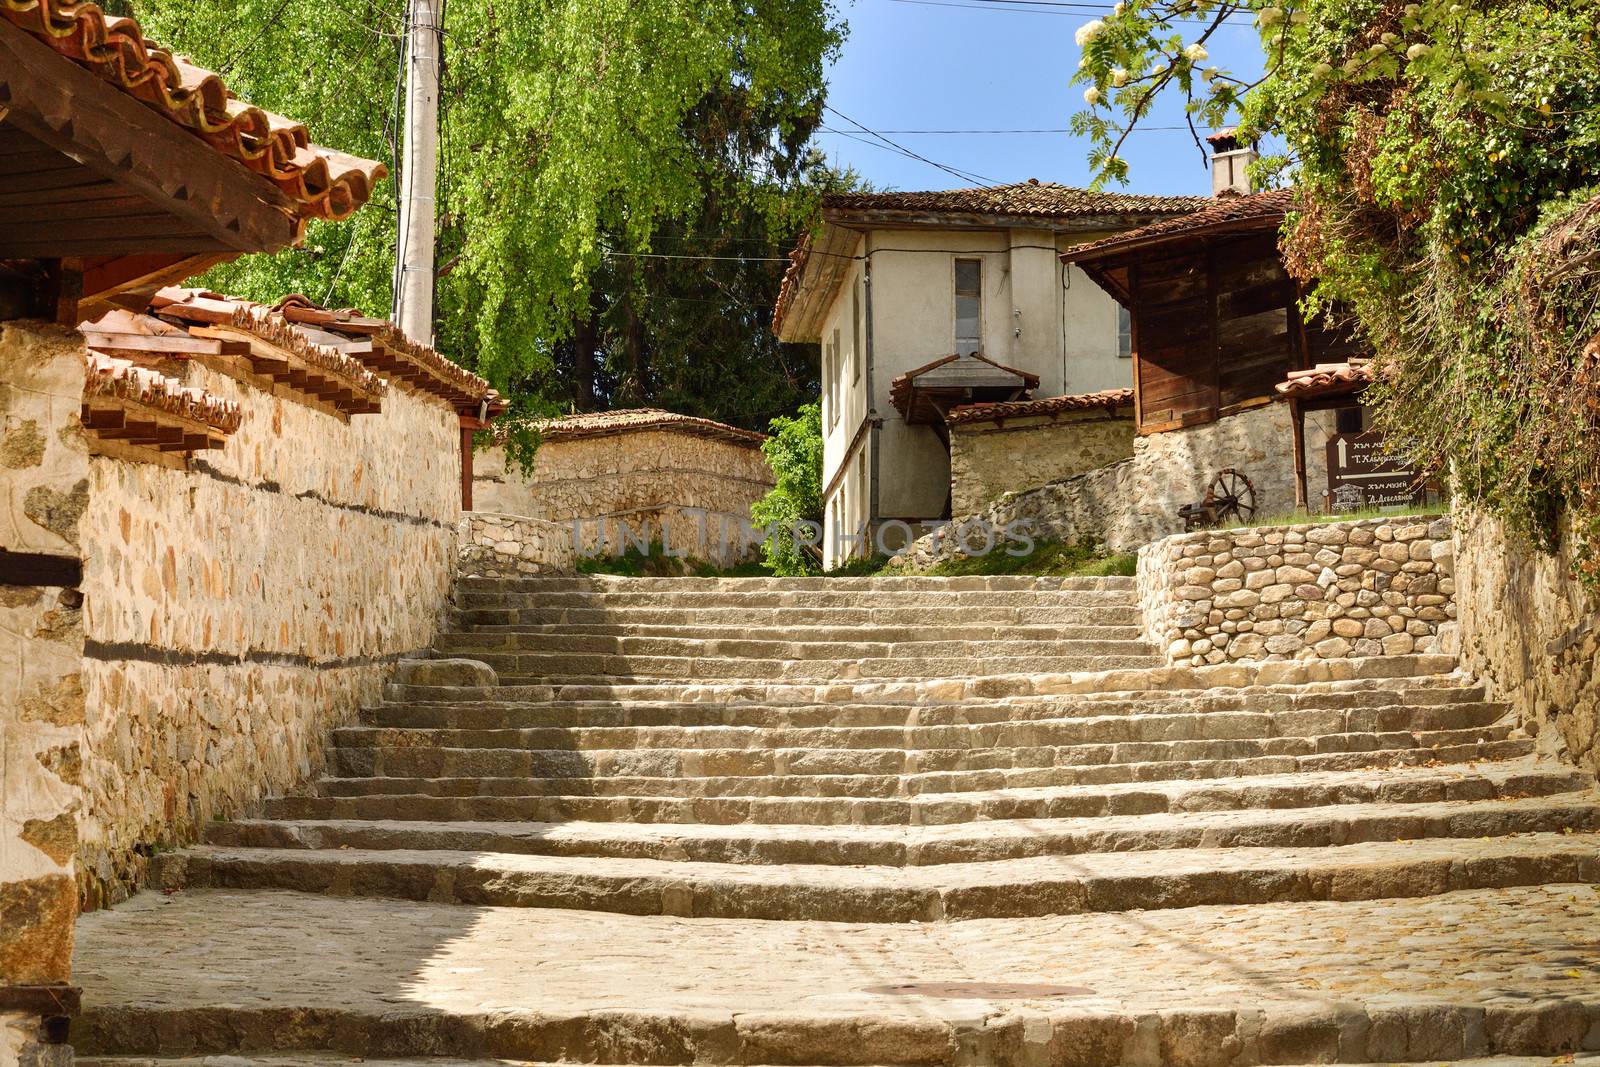 Koprivshtitsa is one of the hundred tourist places of the Bulgarian Tourist Union